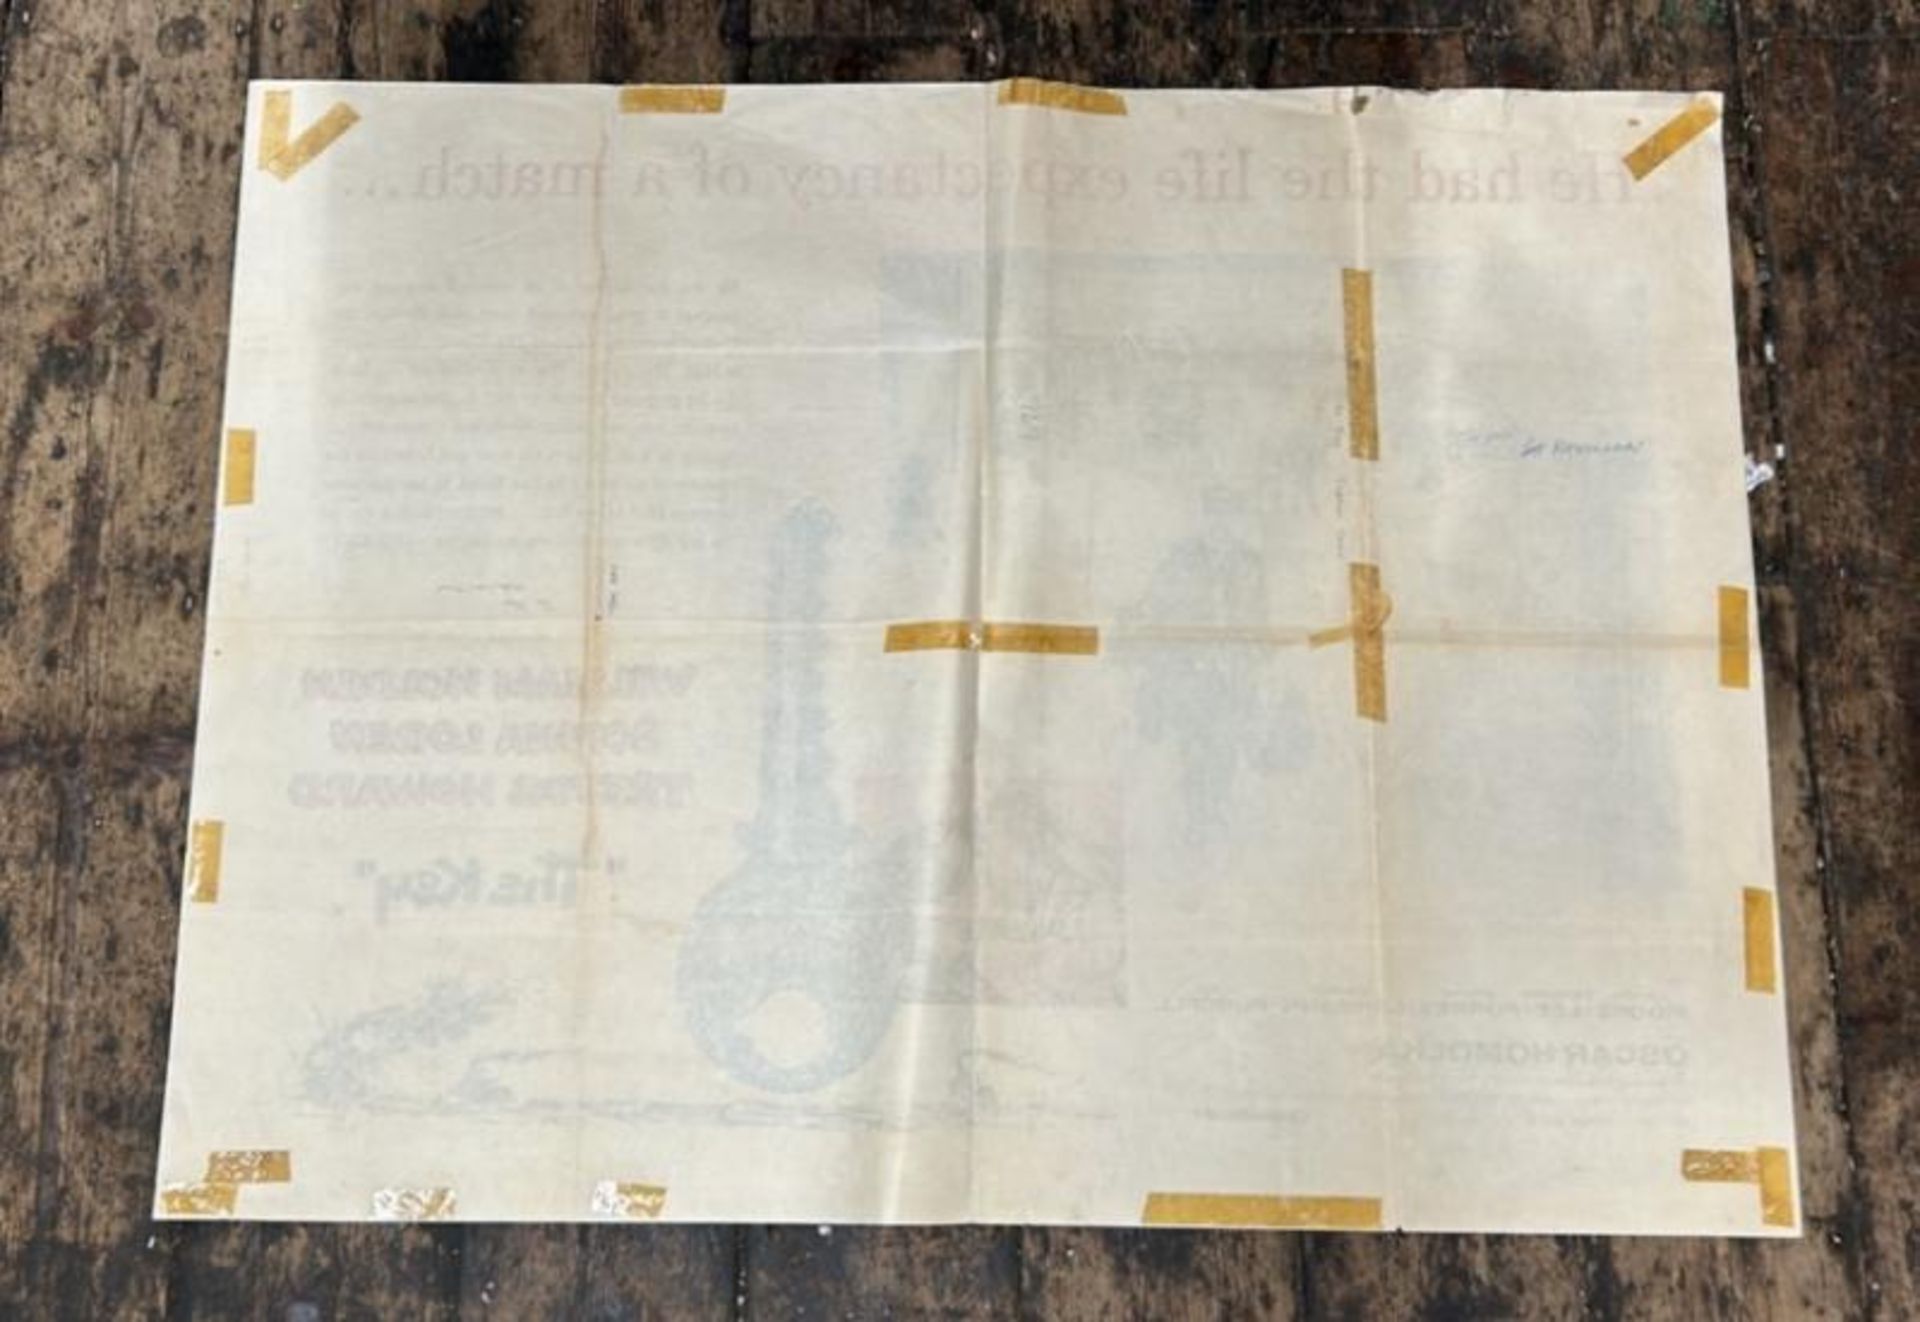 THE KEY, ORIGINAL FILM POSTER, PRINTED IN ENGLAND BY STAFFORD & CO, TAPE TO THE REAR, 10125CM W X - Image 5 of 5